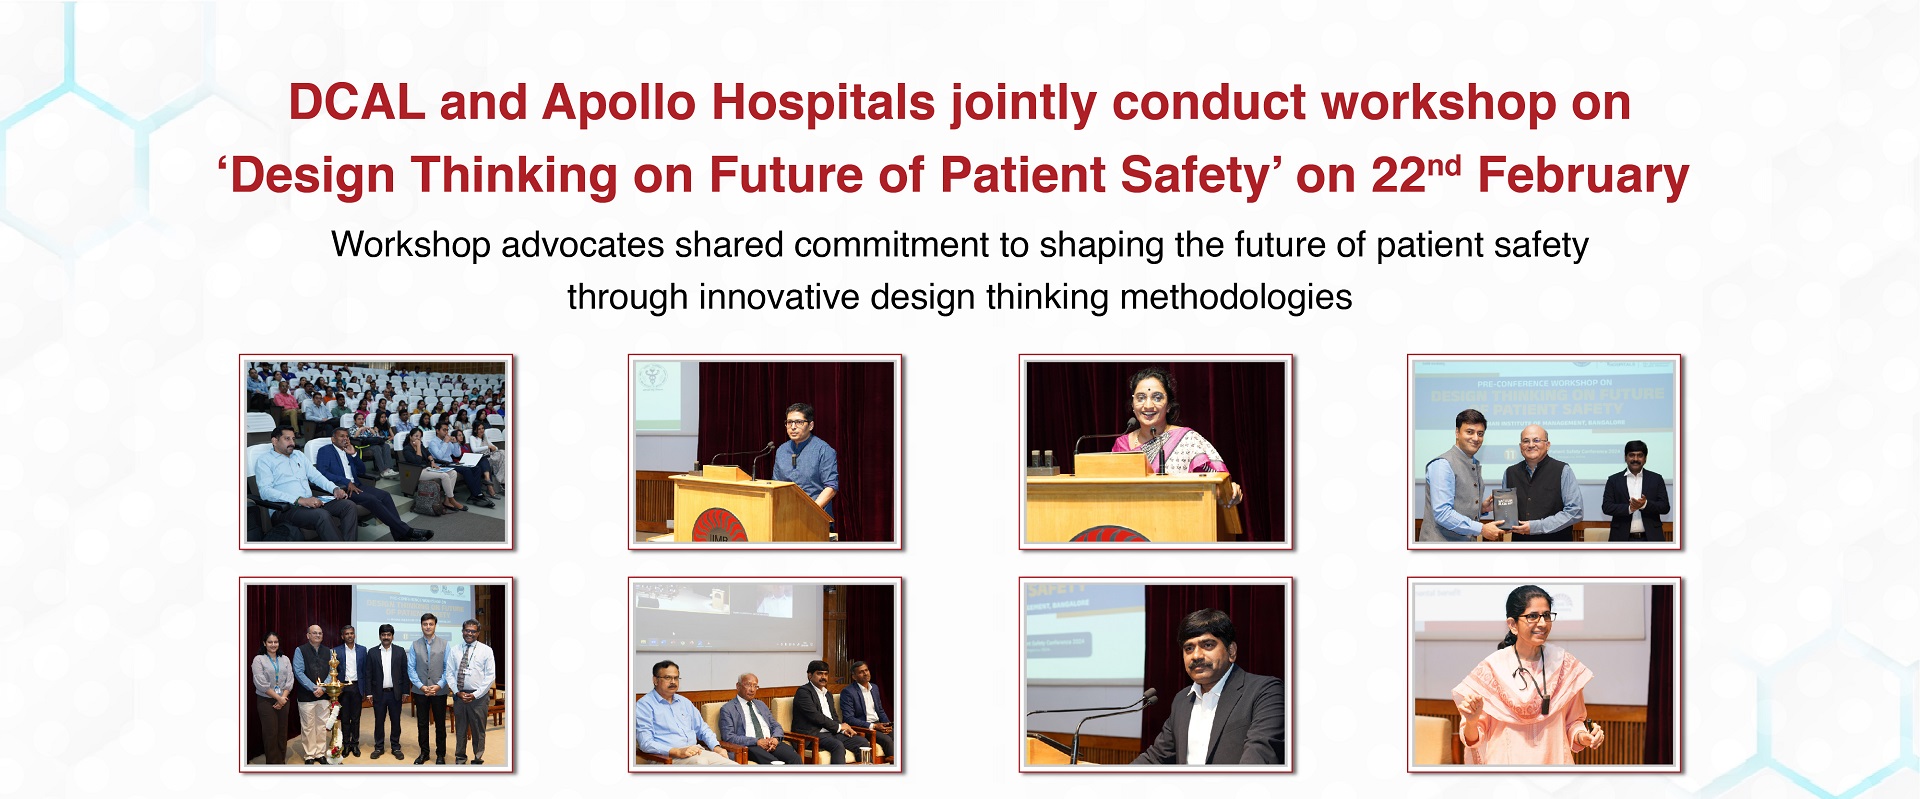 DCAL and Apollo Hospitals jointly conduct workshop on ‘Design Thinking on Future of Patient Safety’ on 22nd February 